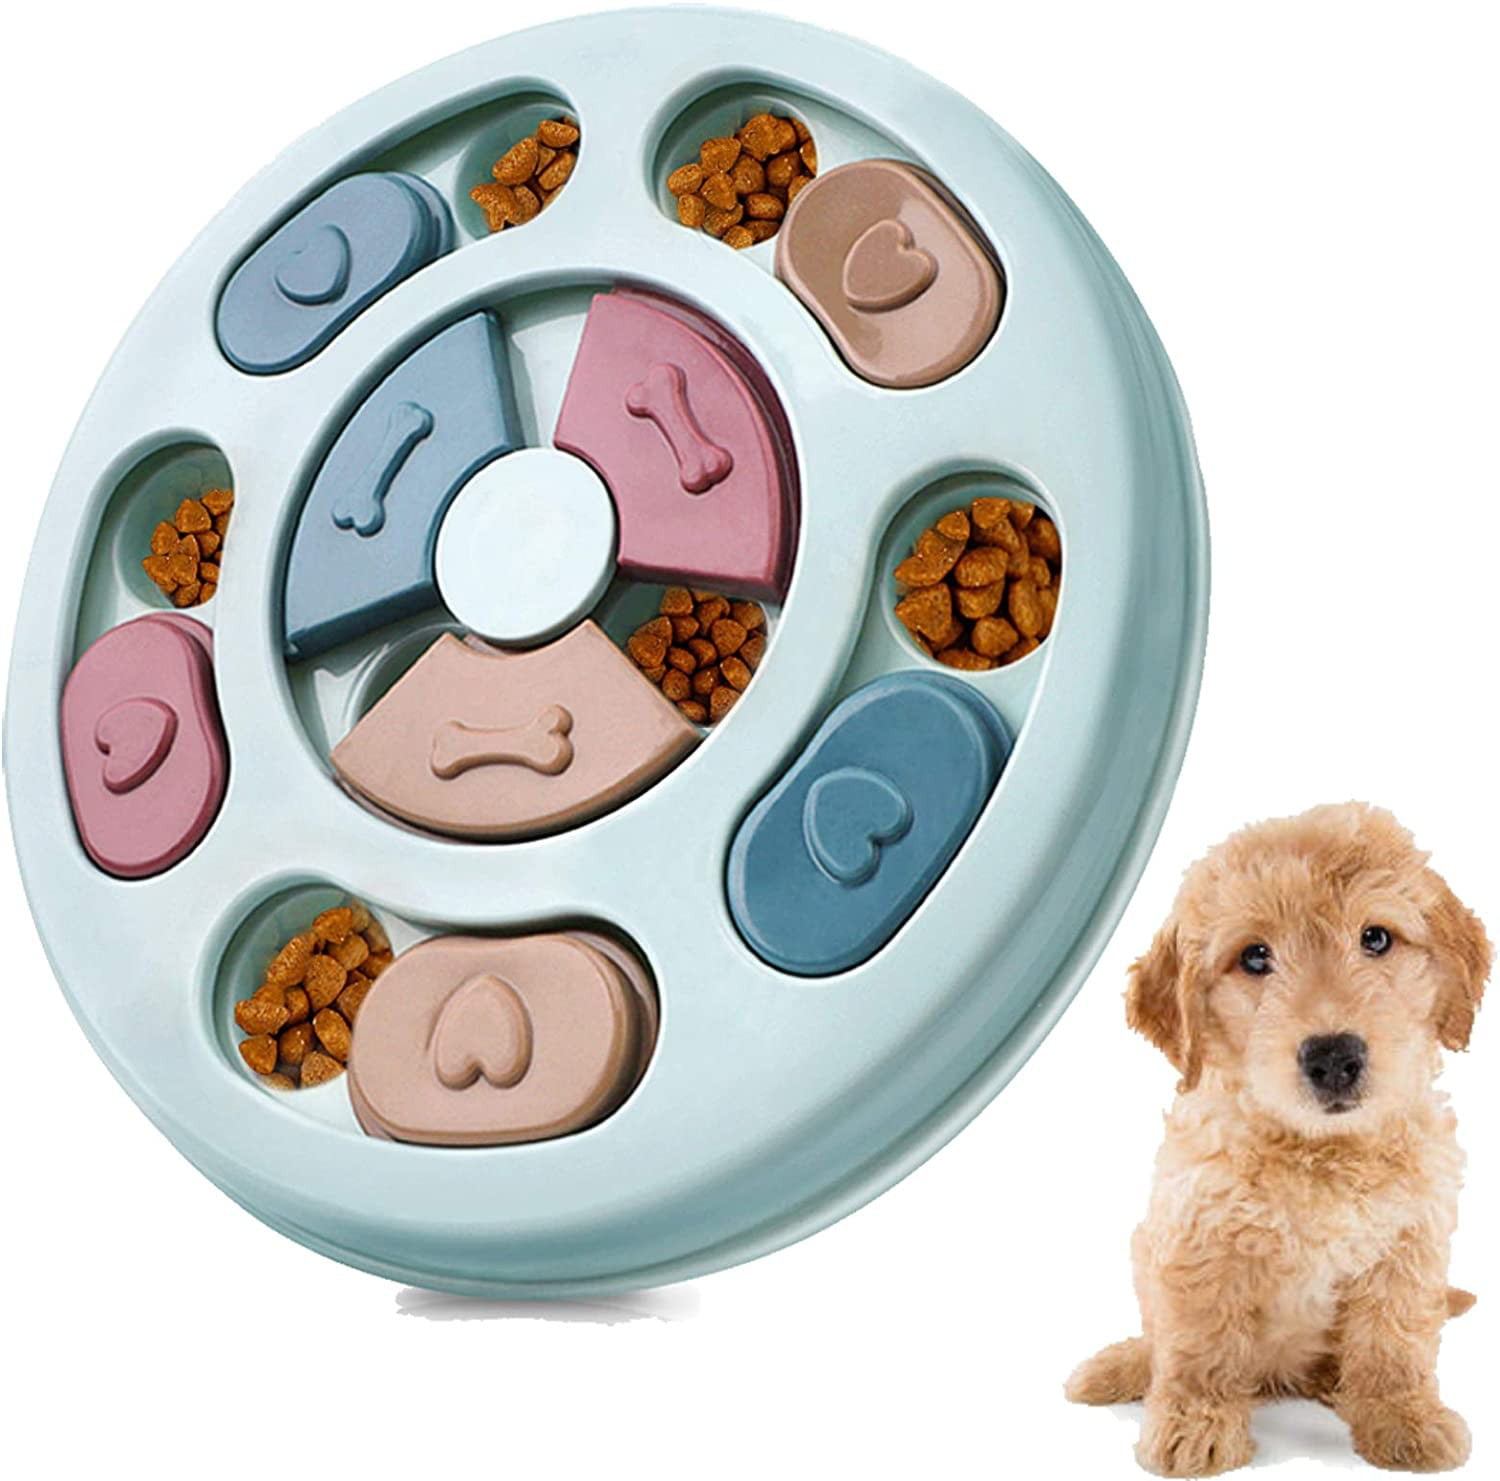 NYDREAM Dog Puzzle Toys-Puppy Treat Dispenser Dog Toys with Non-Slip/Increase IQ/Interactive Flower Slow Dispensing Feeding Pet Dog Training Games Feeder for Mini Dog Puppies 